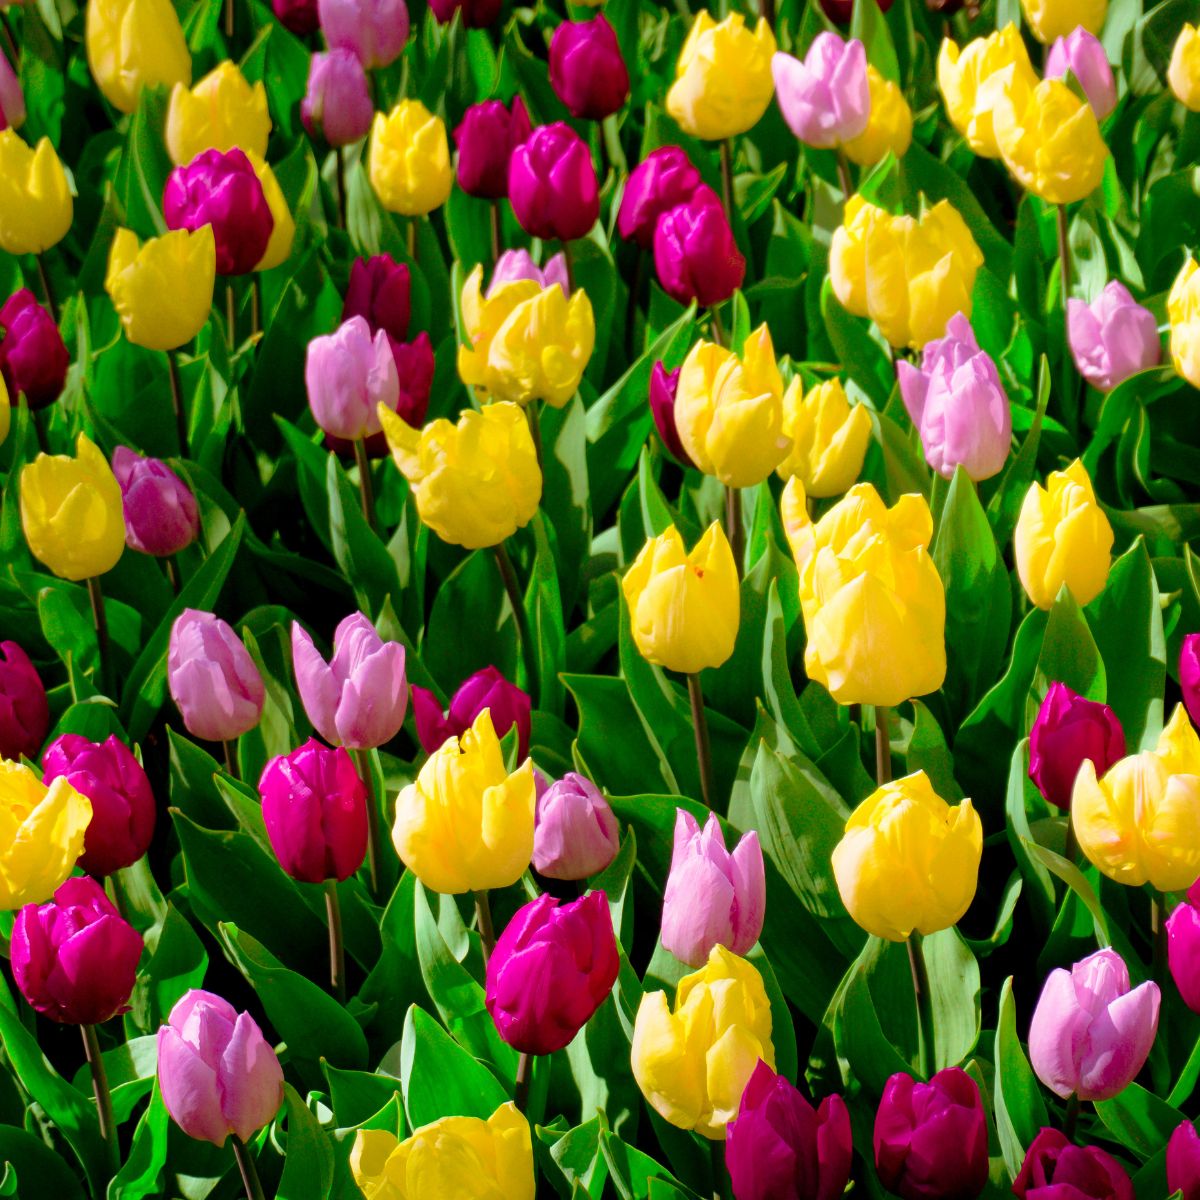 a mass of brightly colored tulips: red, pink, and yellow.